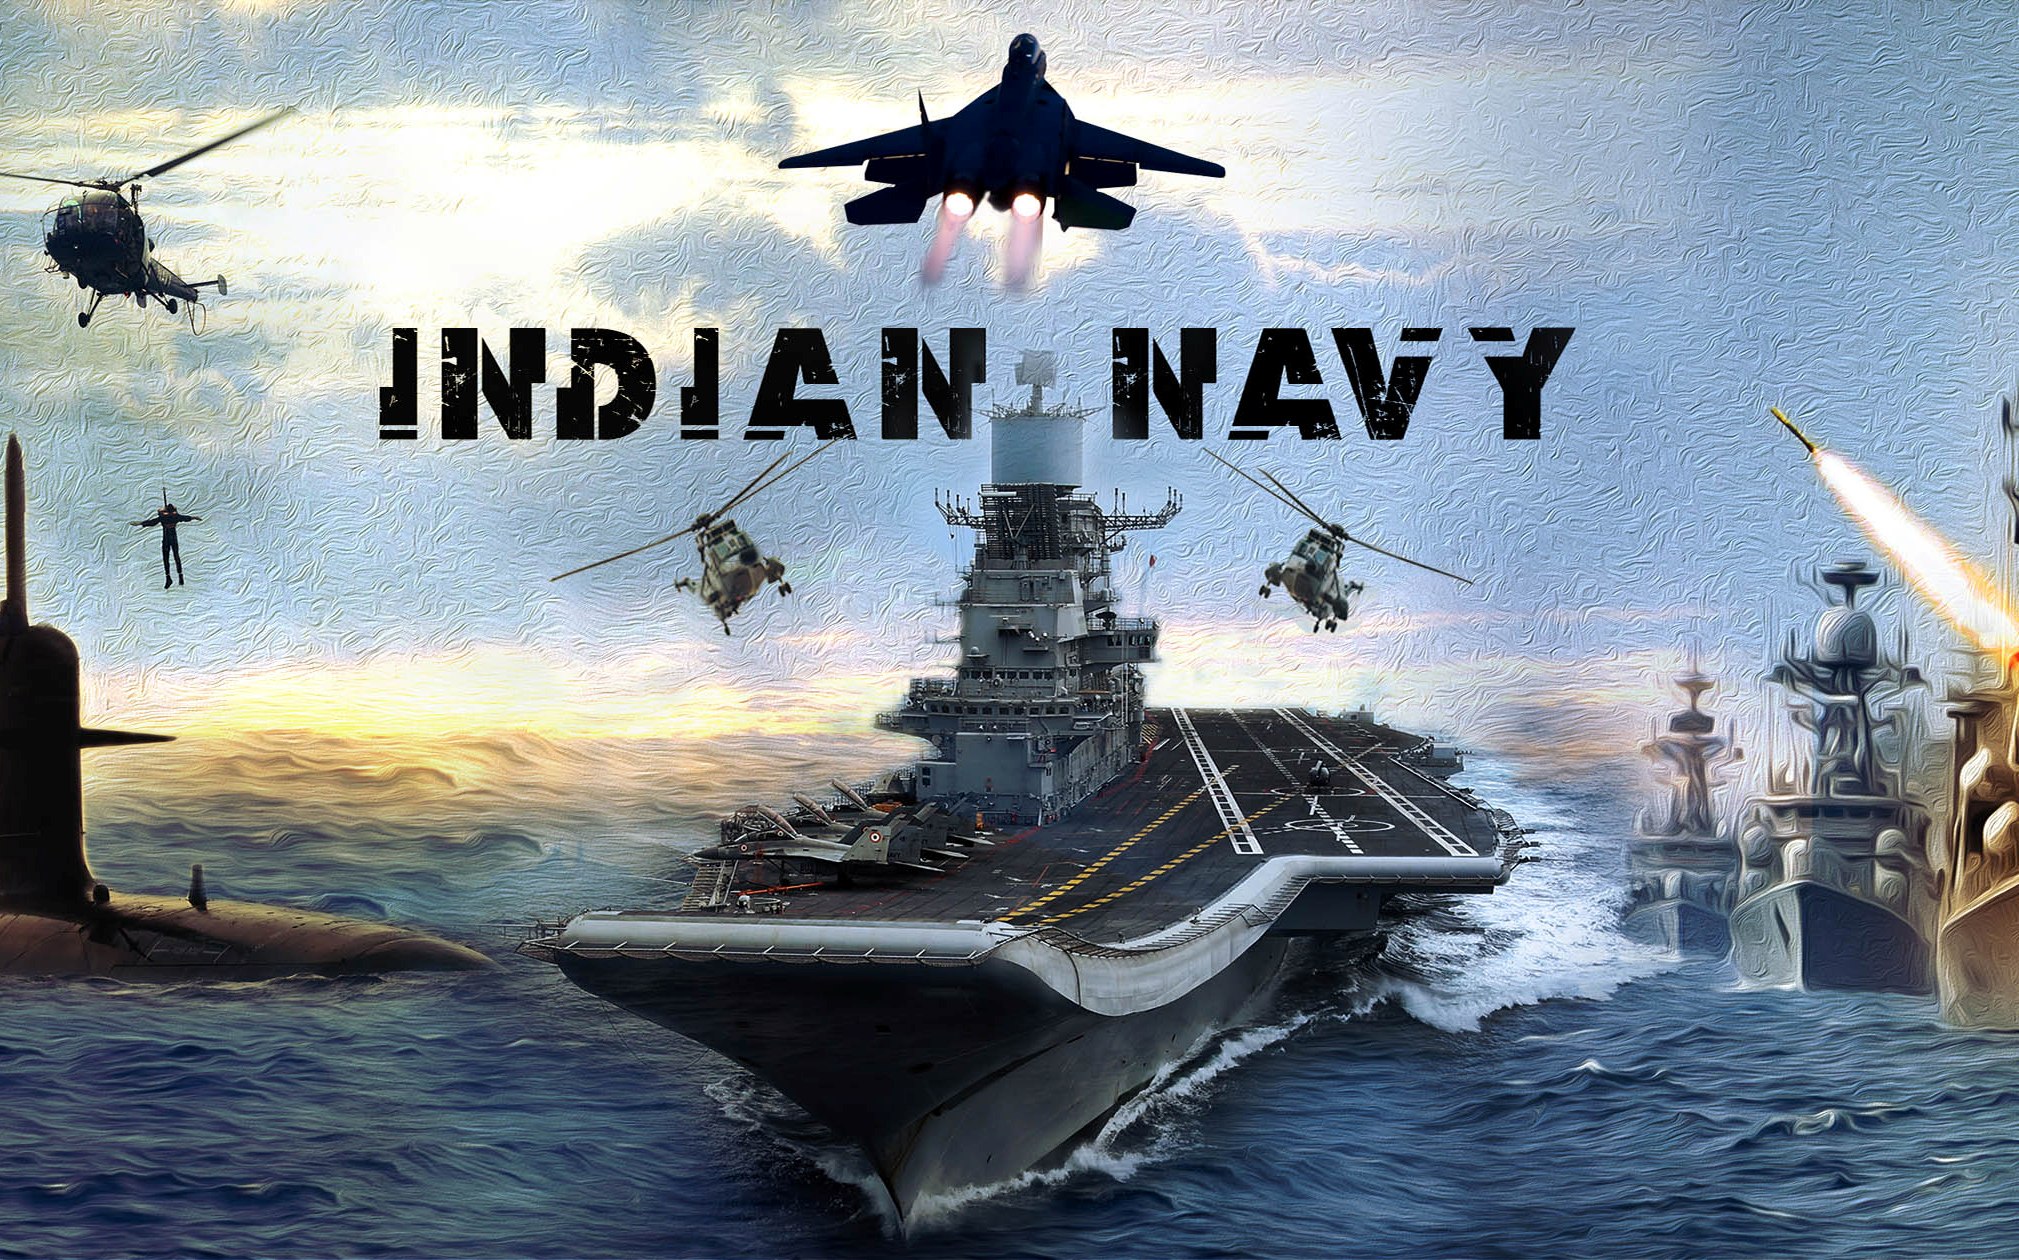 The Day when Indian Navy Bombed Karachi: Indian Navy Day